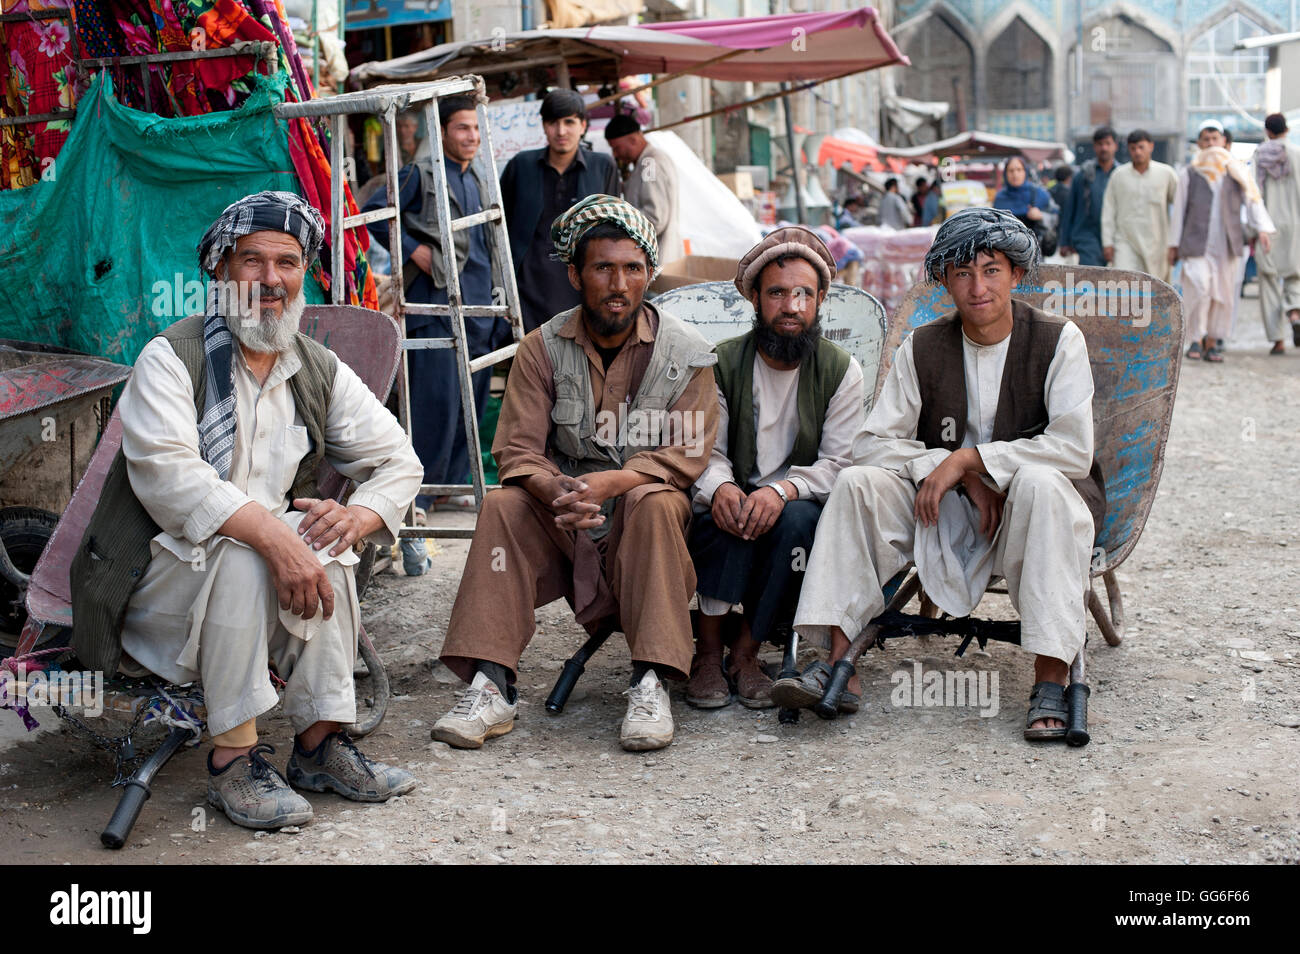 Taking a load off, a quick time out for these hard working Afghans in a bazaar in Kabul, Afghanistan, Asia Stock Photo